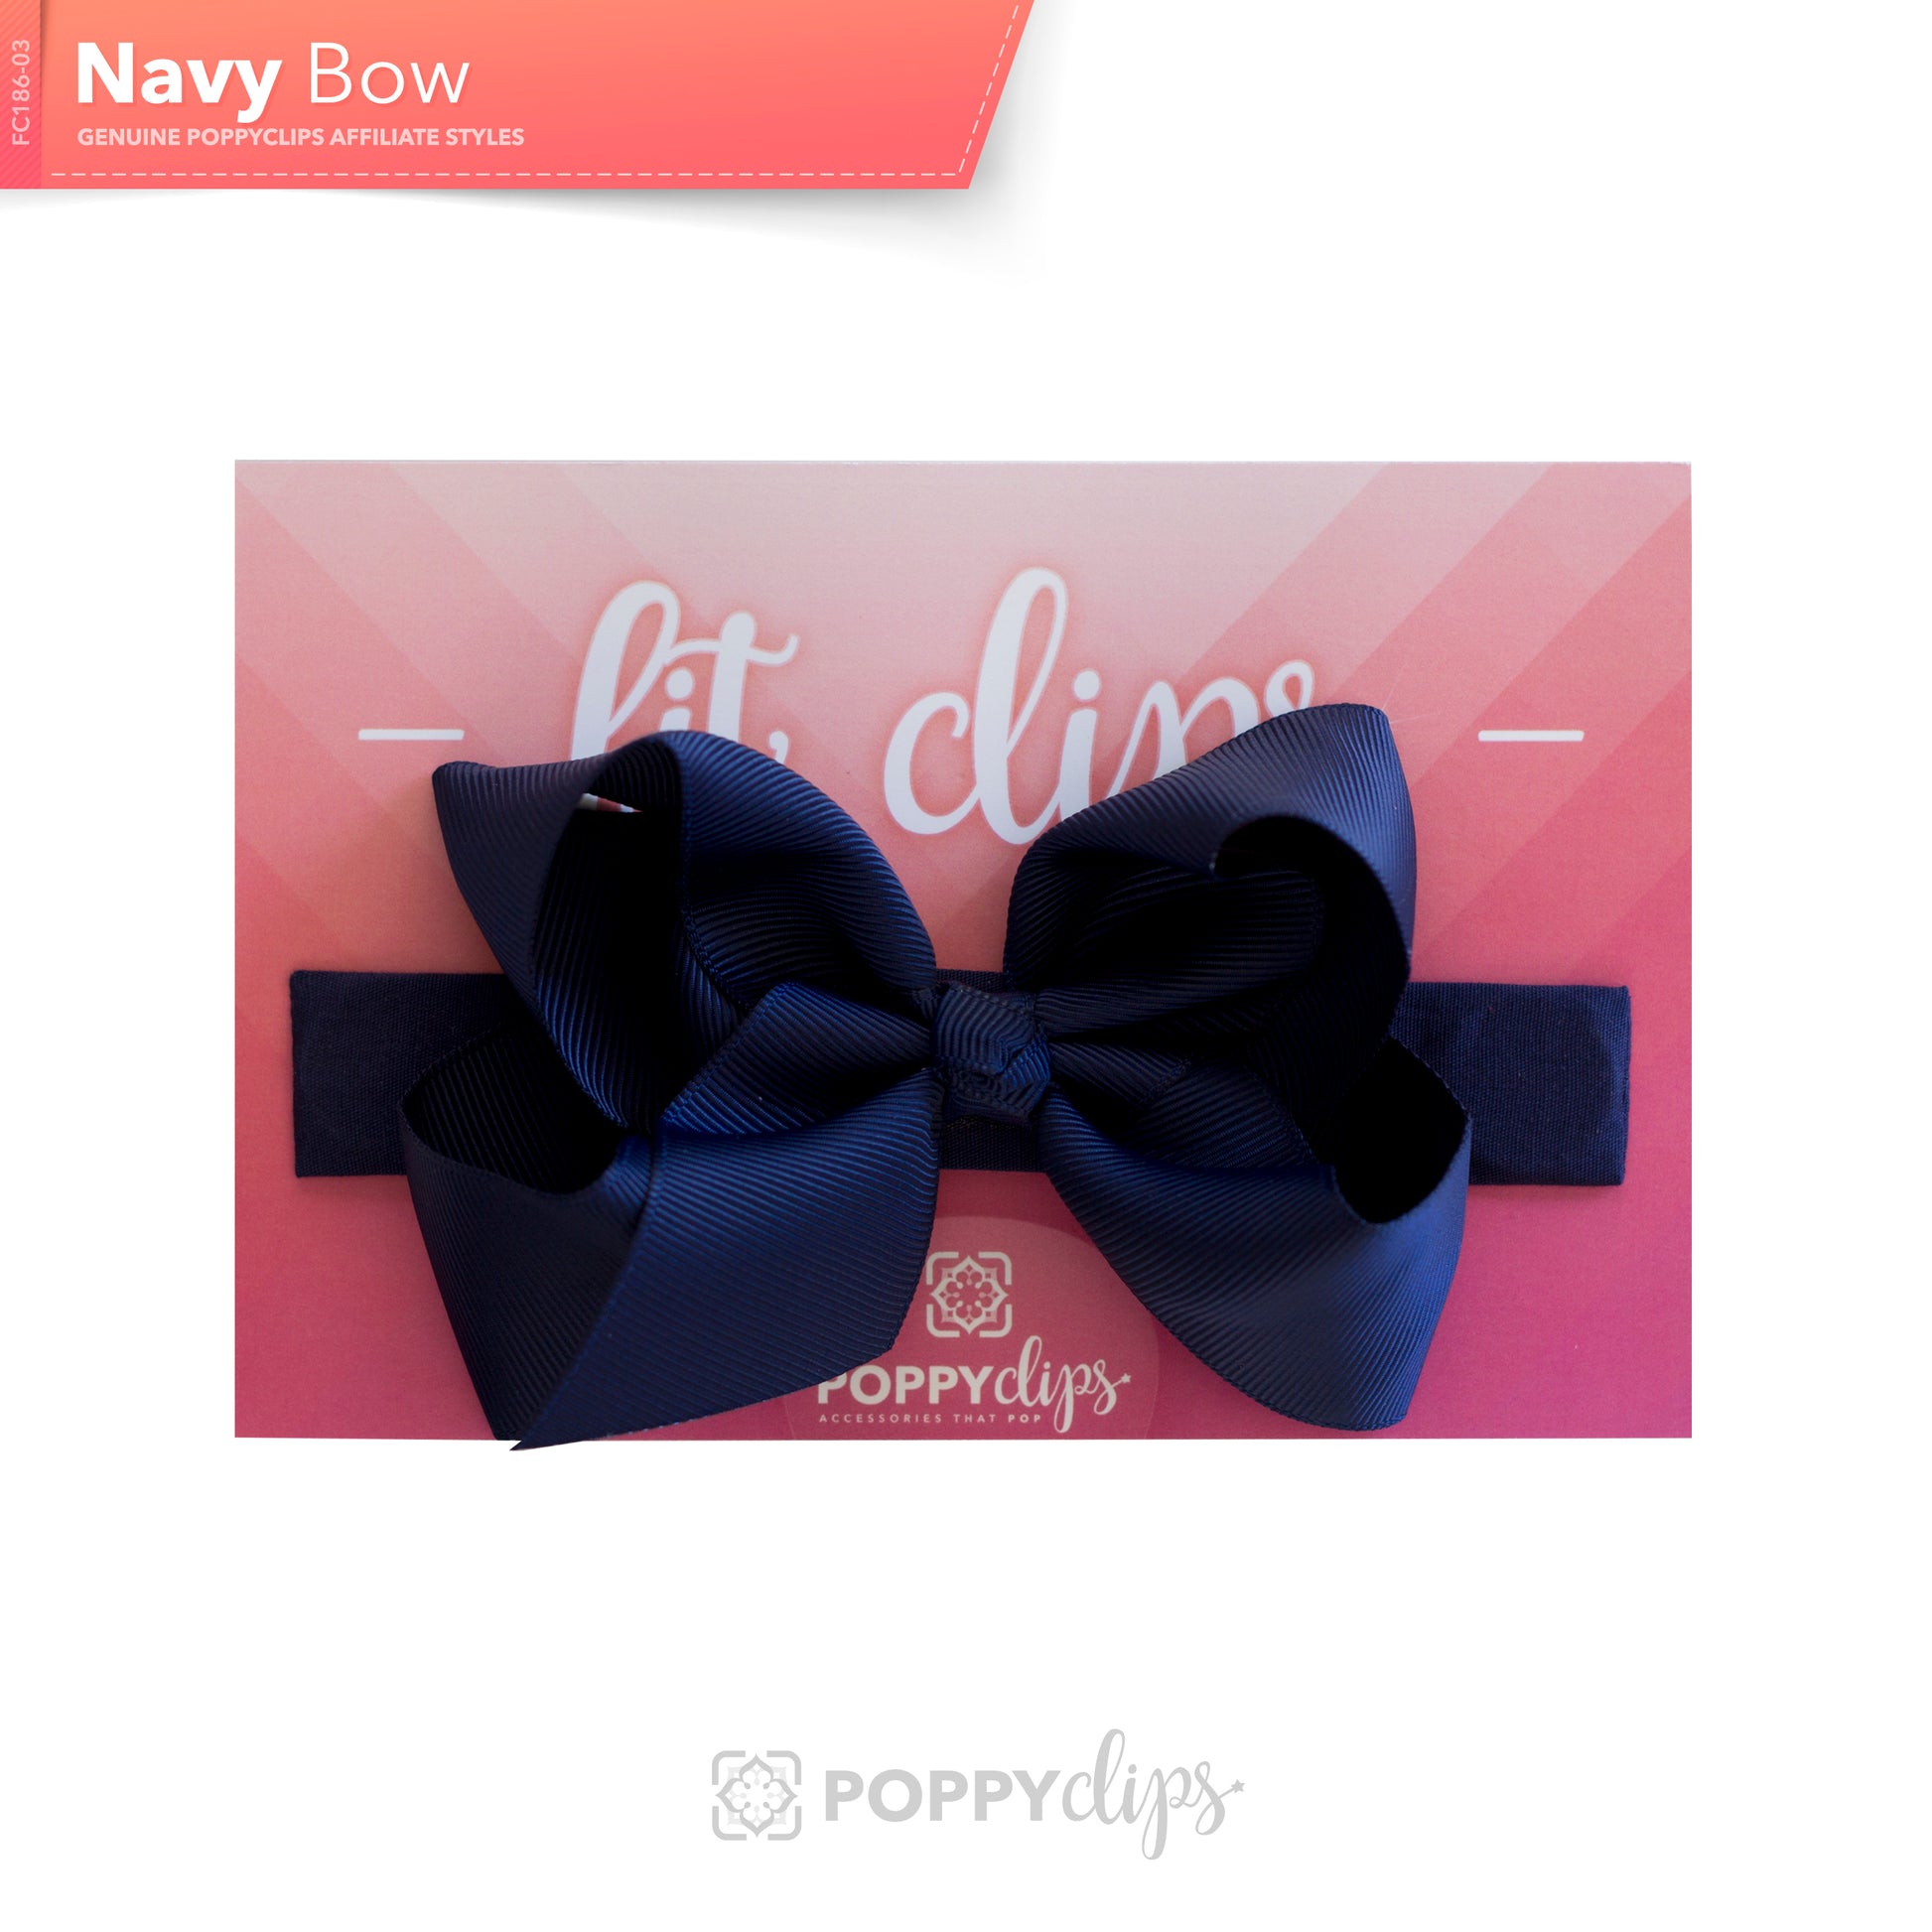 5 ¼” long by 7/8” wide navy blue material with hidden magnets at each end.  Centered on the outside is a double navy blue bow that is approximately 4” across.